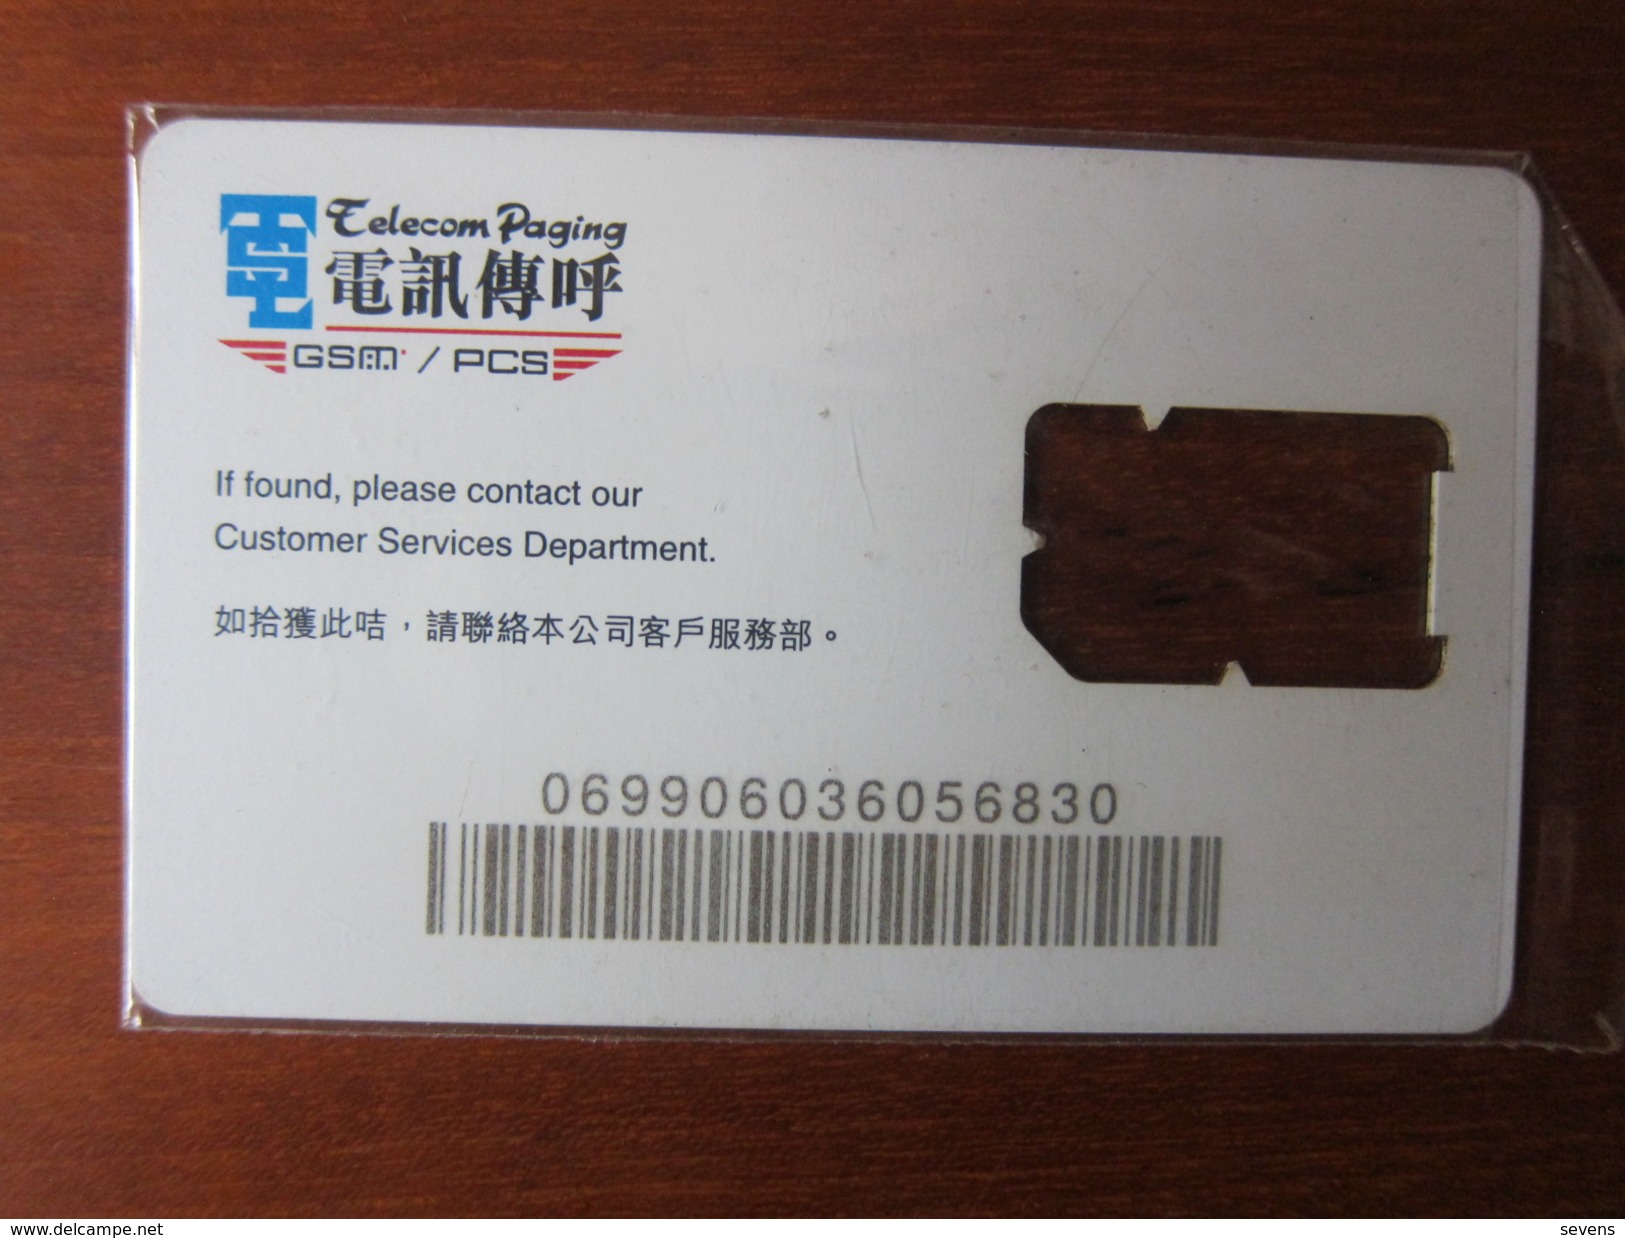 Telecom Paging SIM Card,without Chip - Taiwan (Formosa)